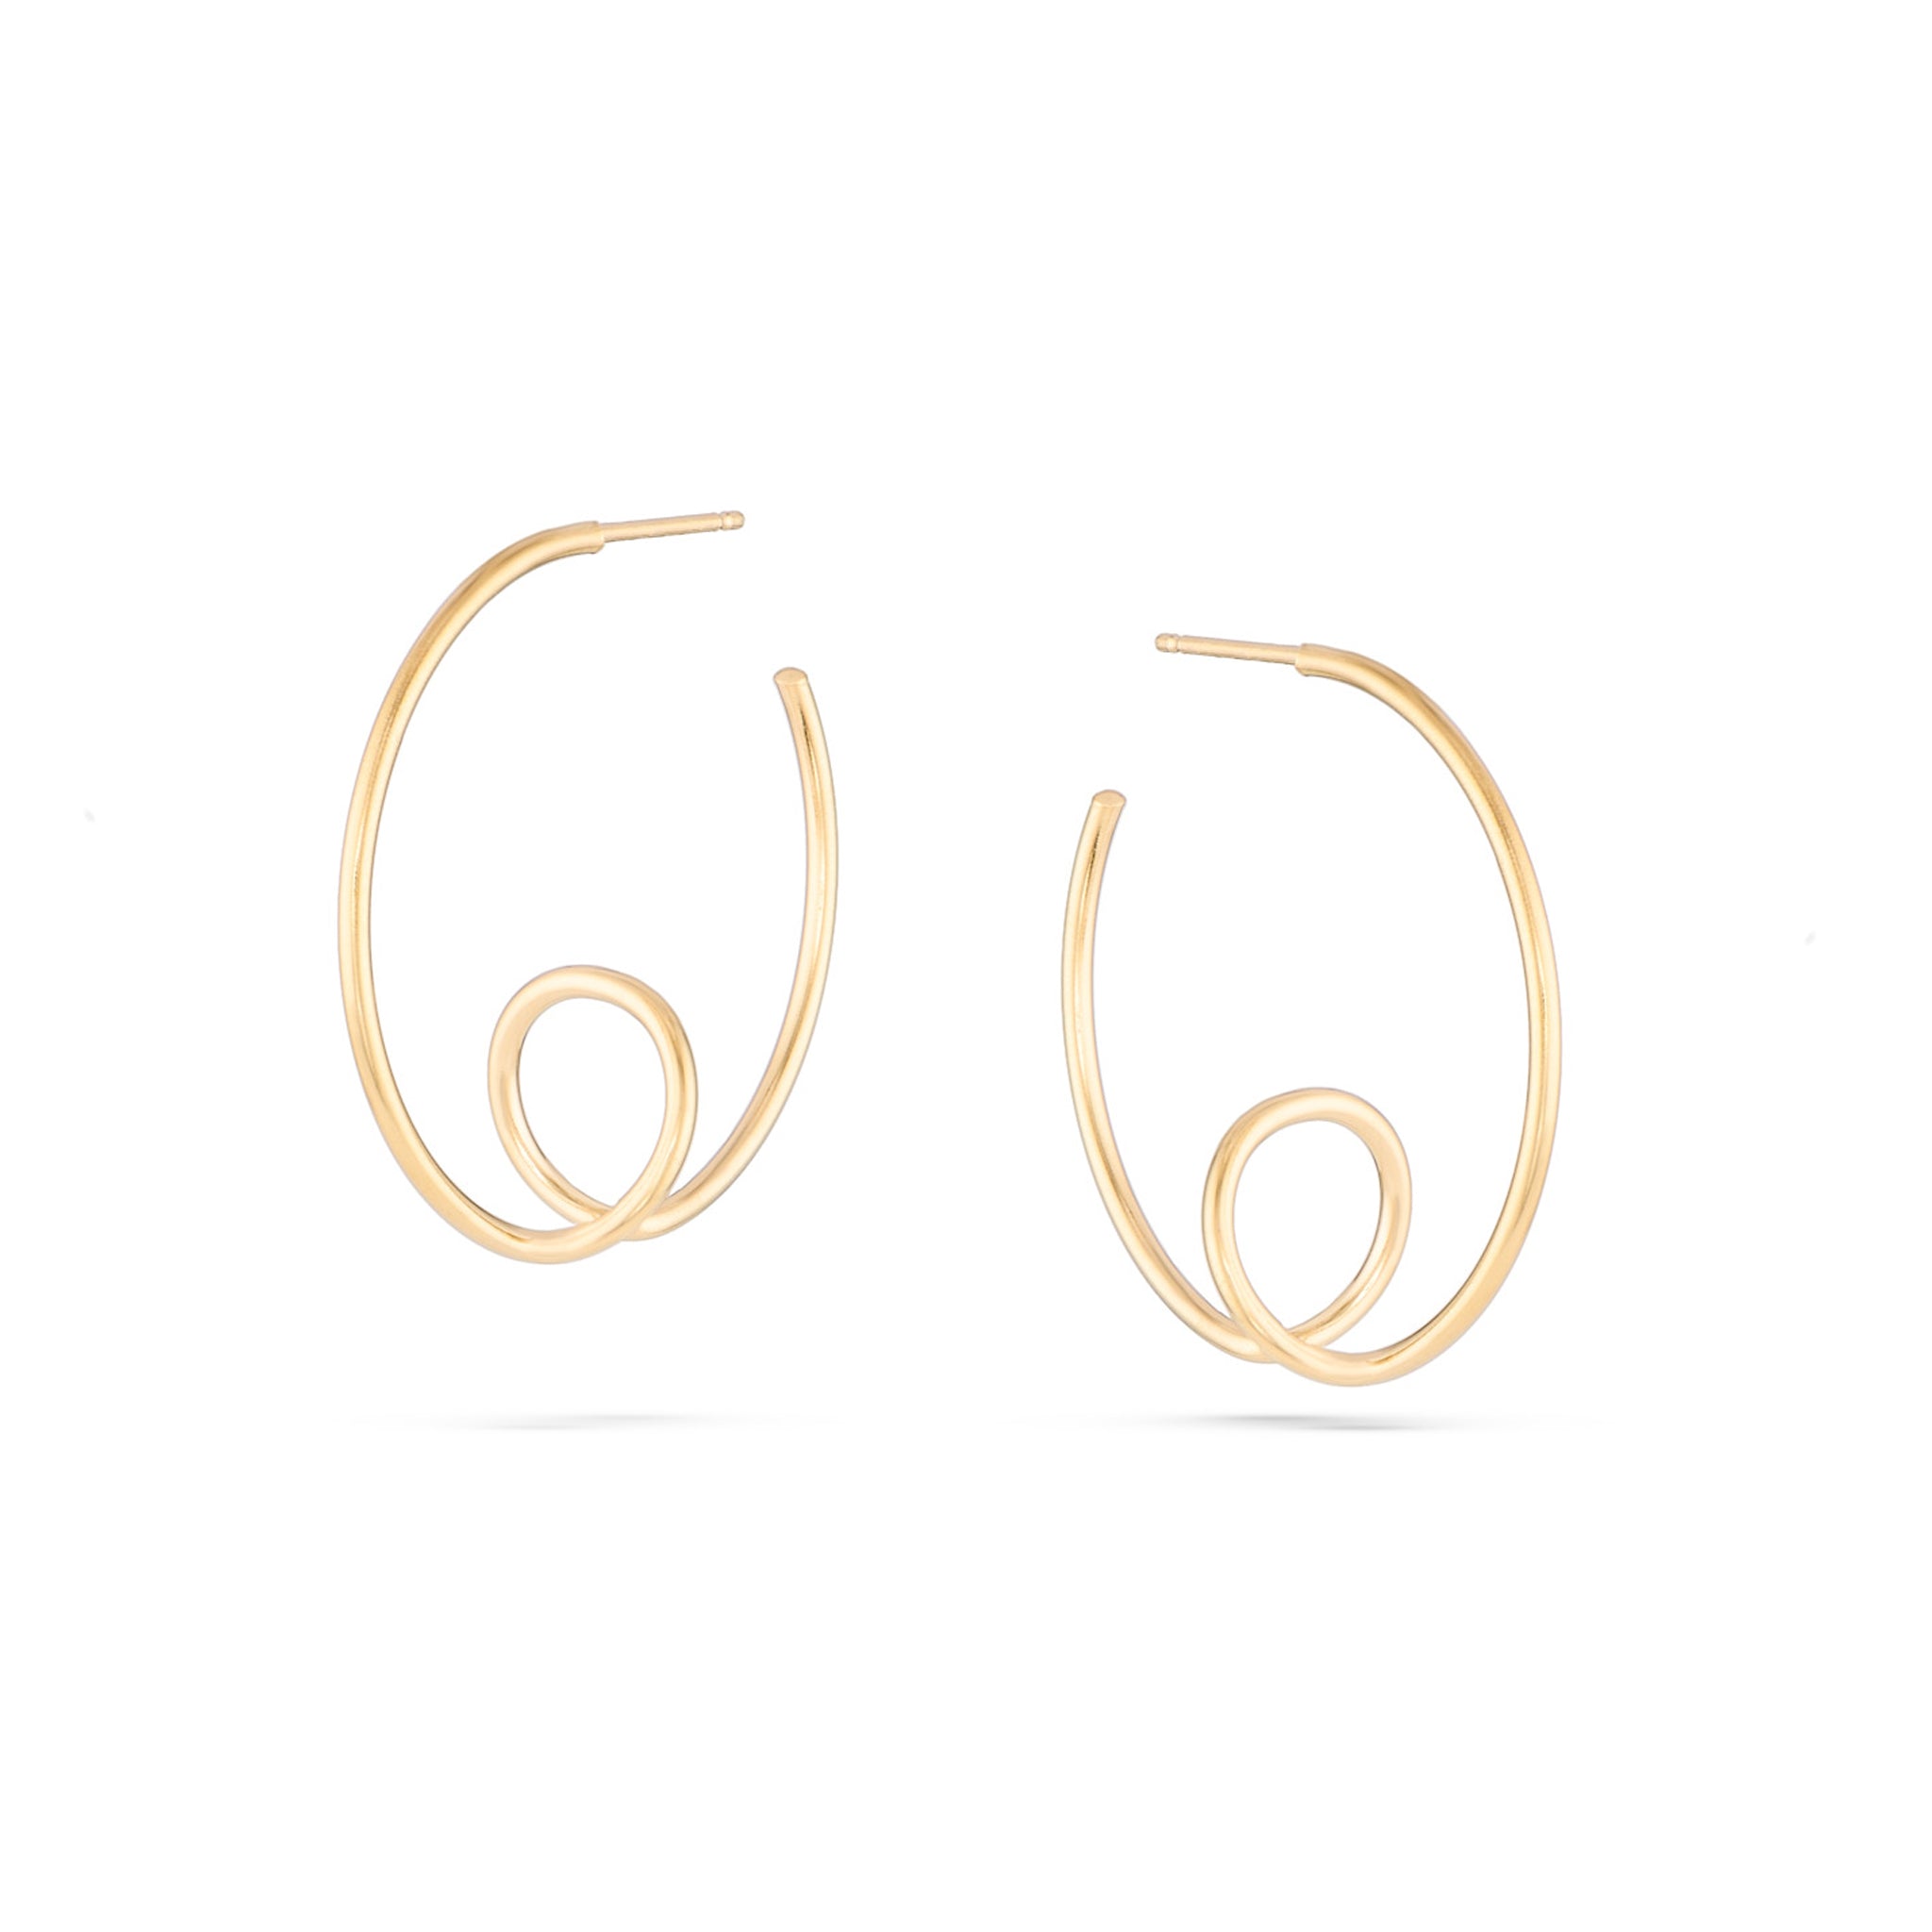 Pirouette Hoops - Small